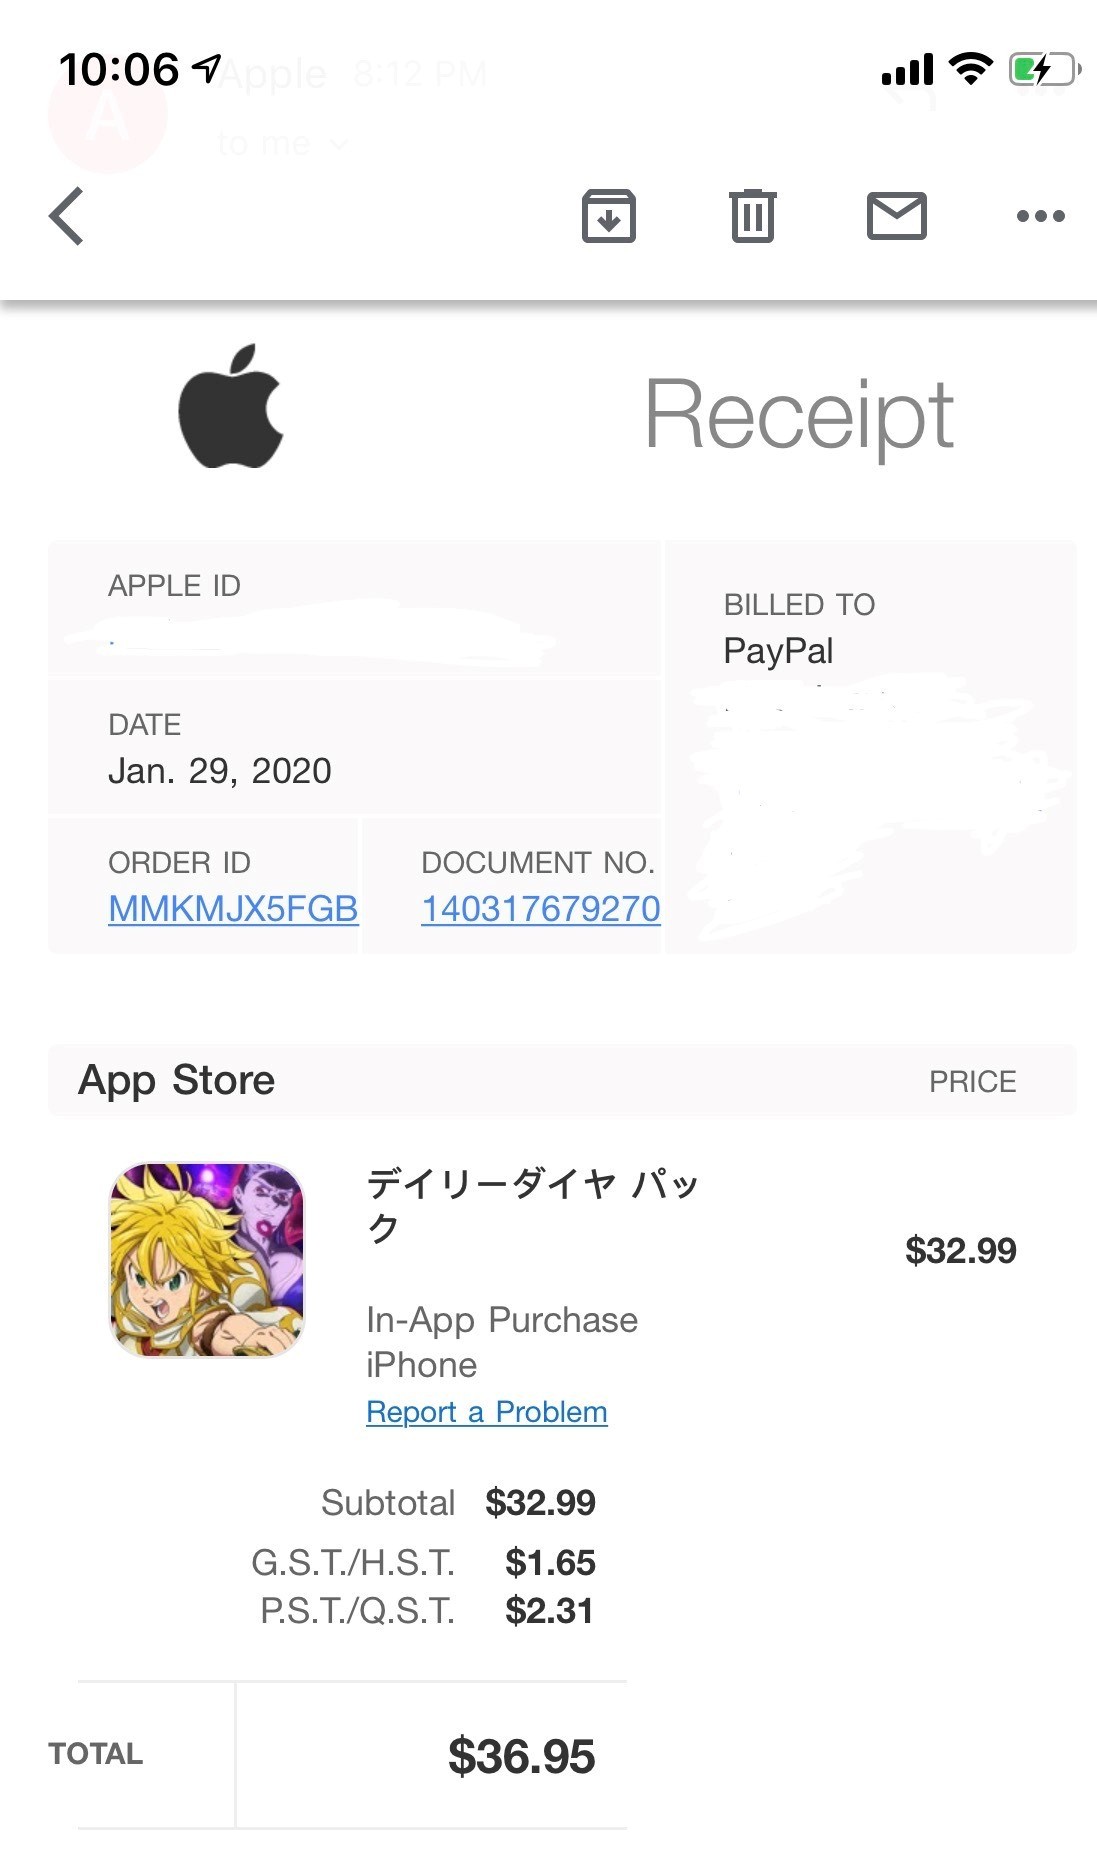 this purchase is not eligible for a refund - Apple Community